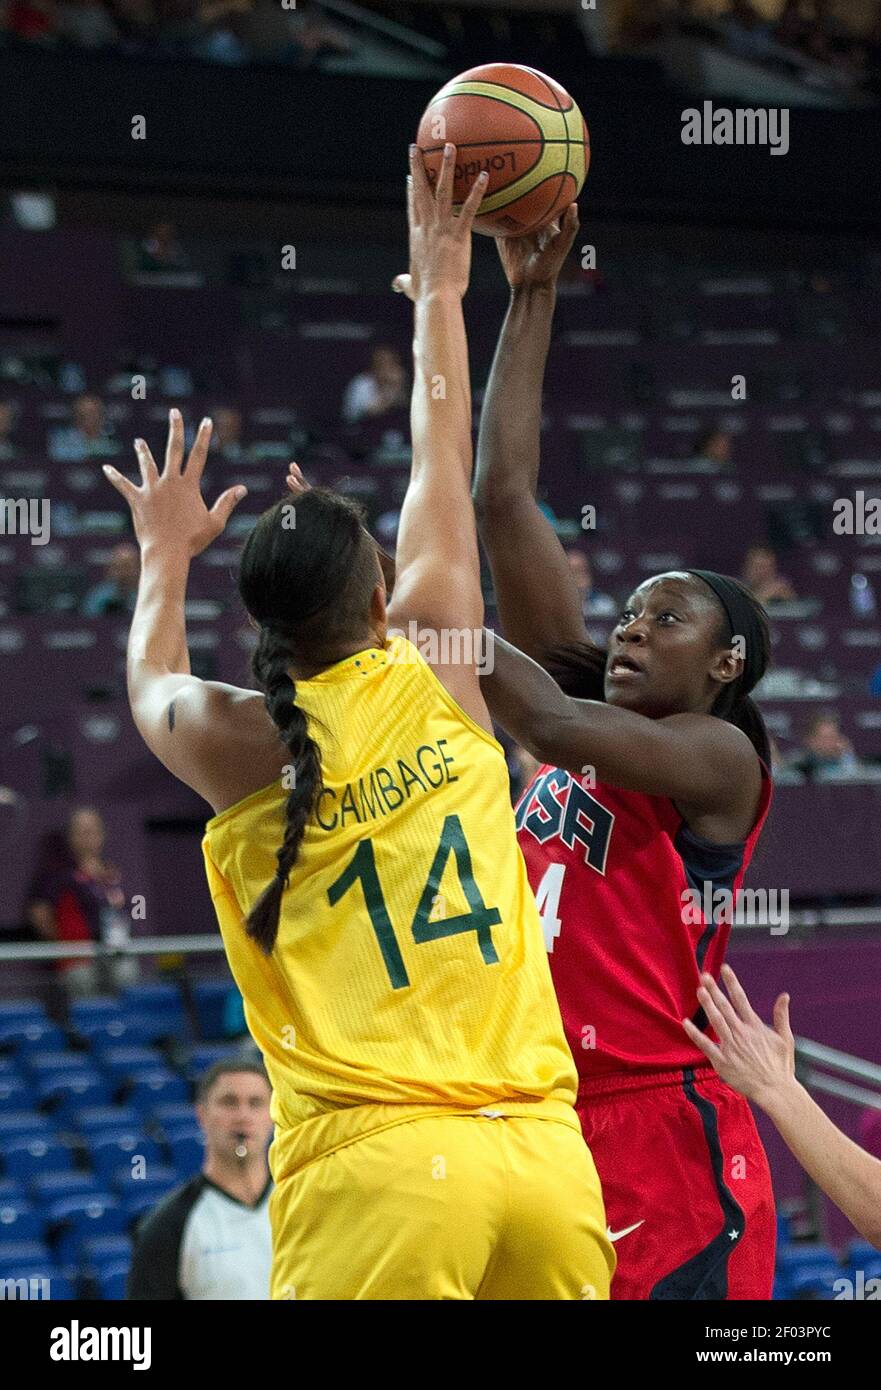 USA's Tina Charles (14) shot is block by Australia's Elizabeth Cambage (14)  during their semifinals game at the Basketball Arena at the North Greenwich  Arena during the 2012 Summer Olympic Games in